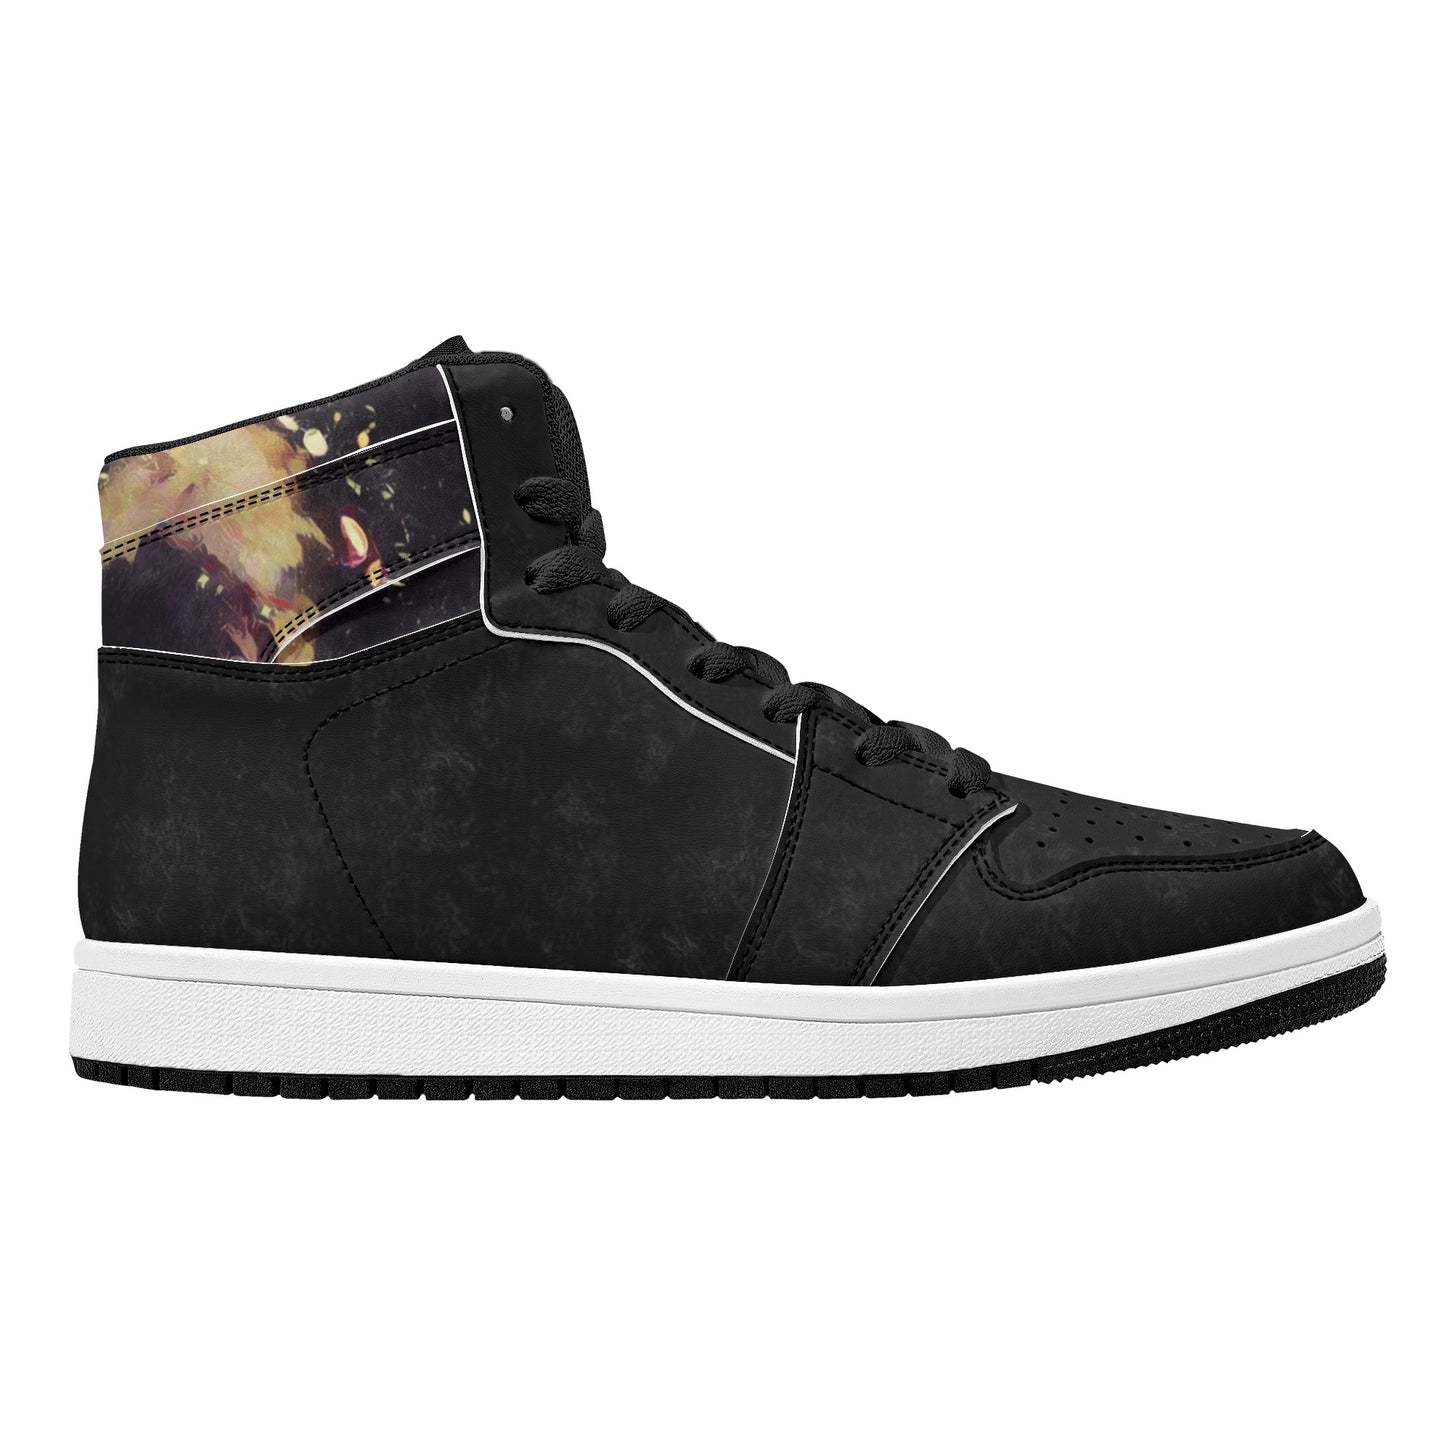 CV20YL - HINDSIGHT CHILLZ Mens High Top Leather Sneakers